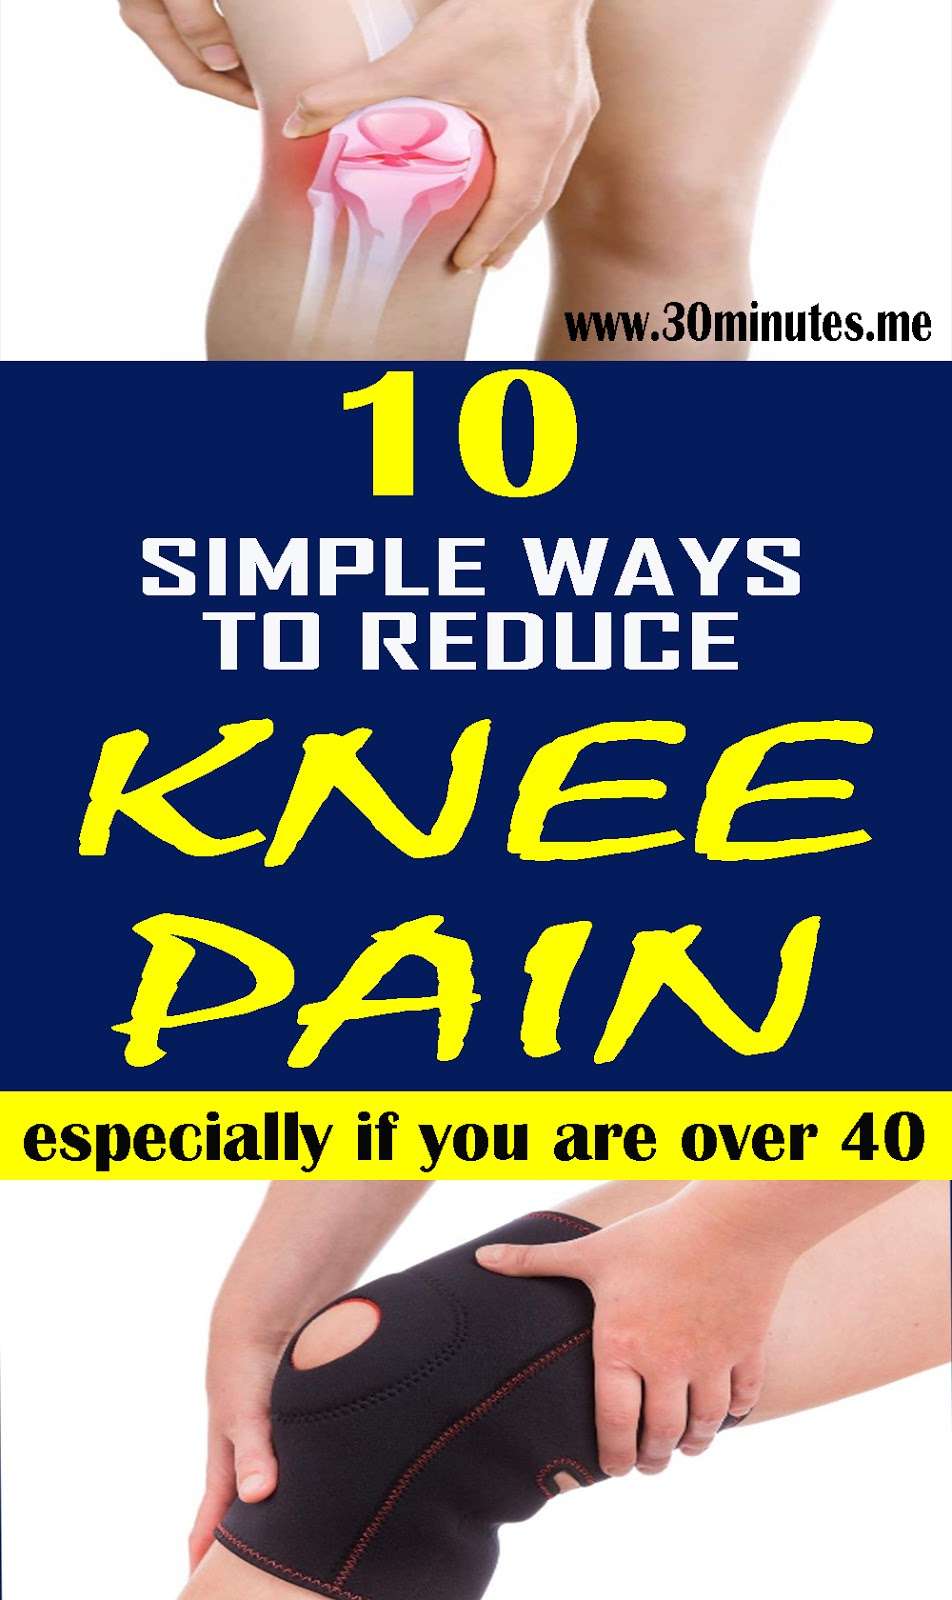 How to get rid of knee pain: 10 Simple ways